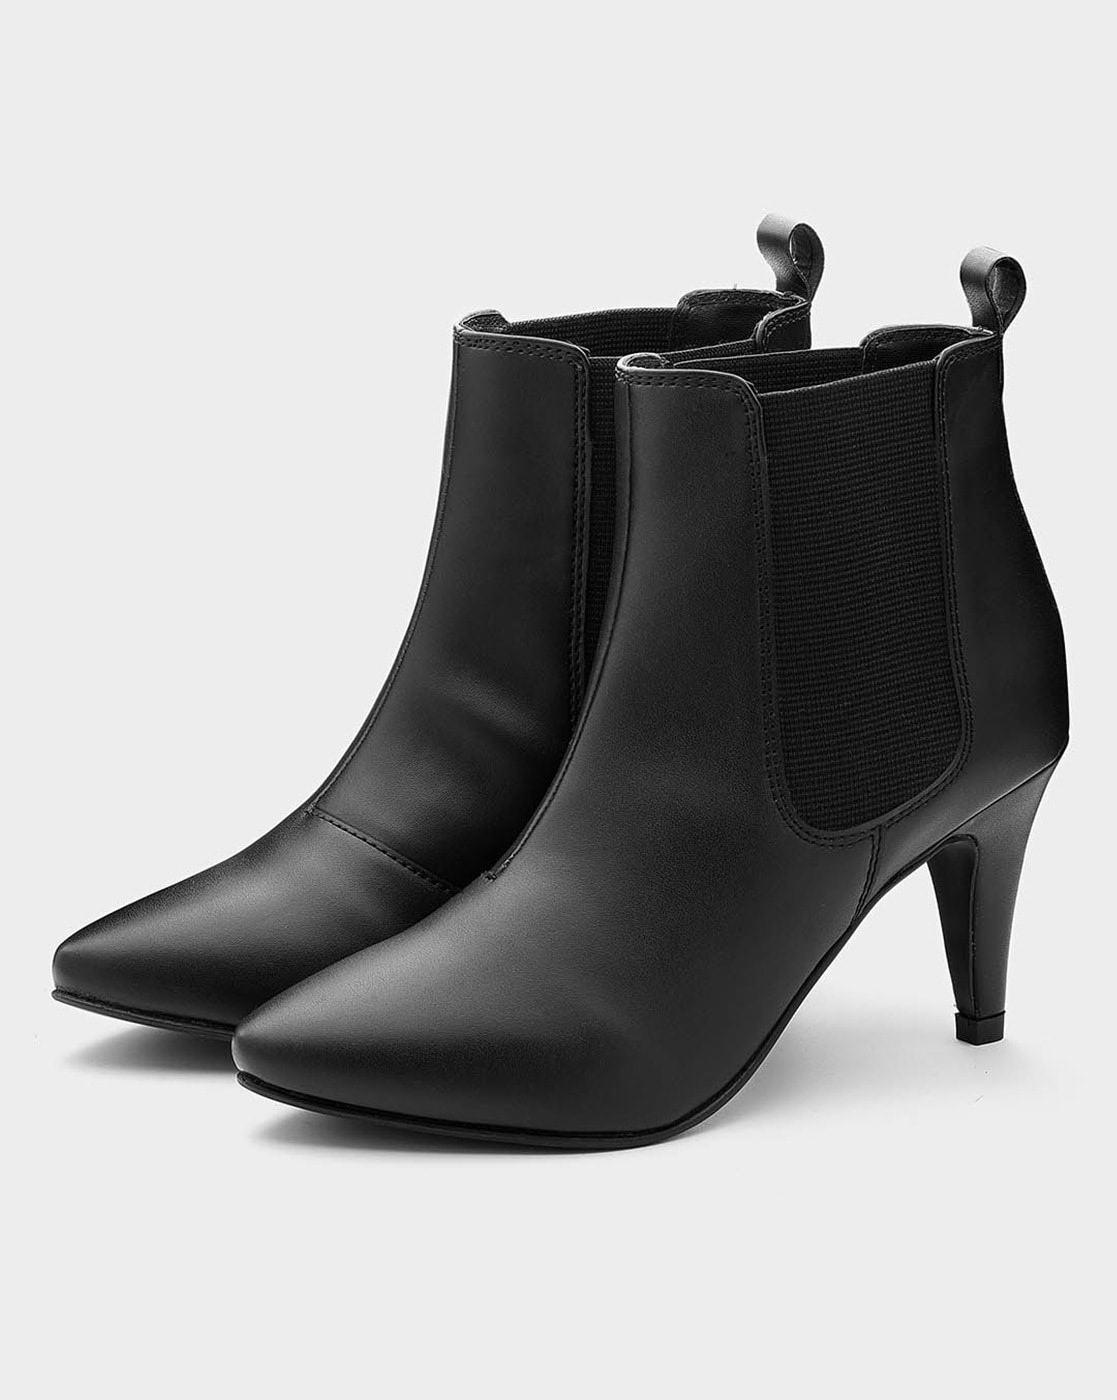 Display more than 113 black heeled boots super hot